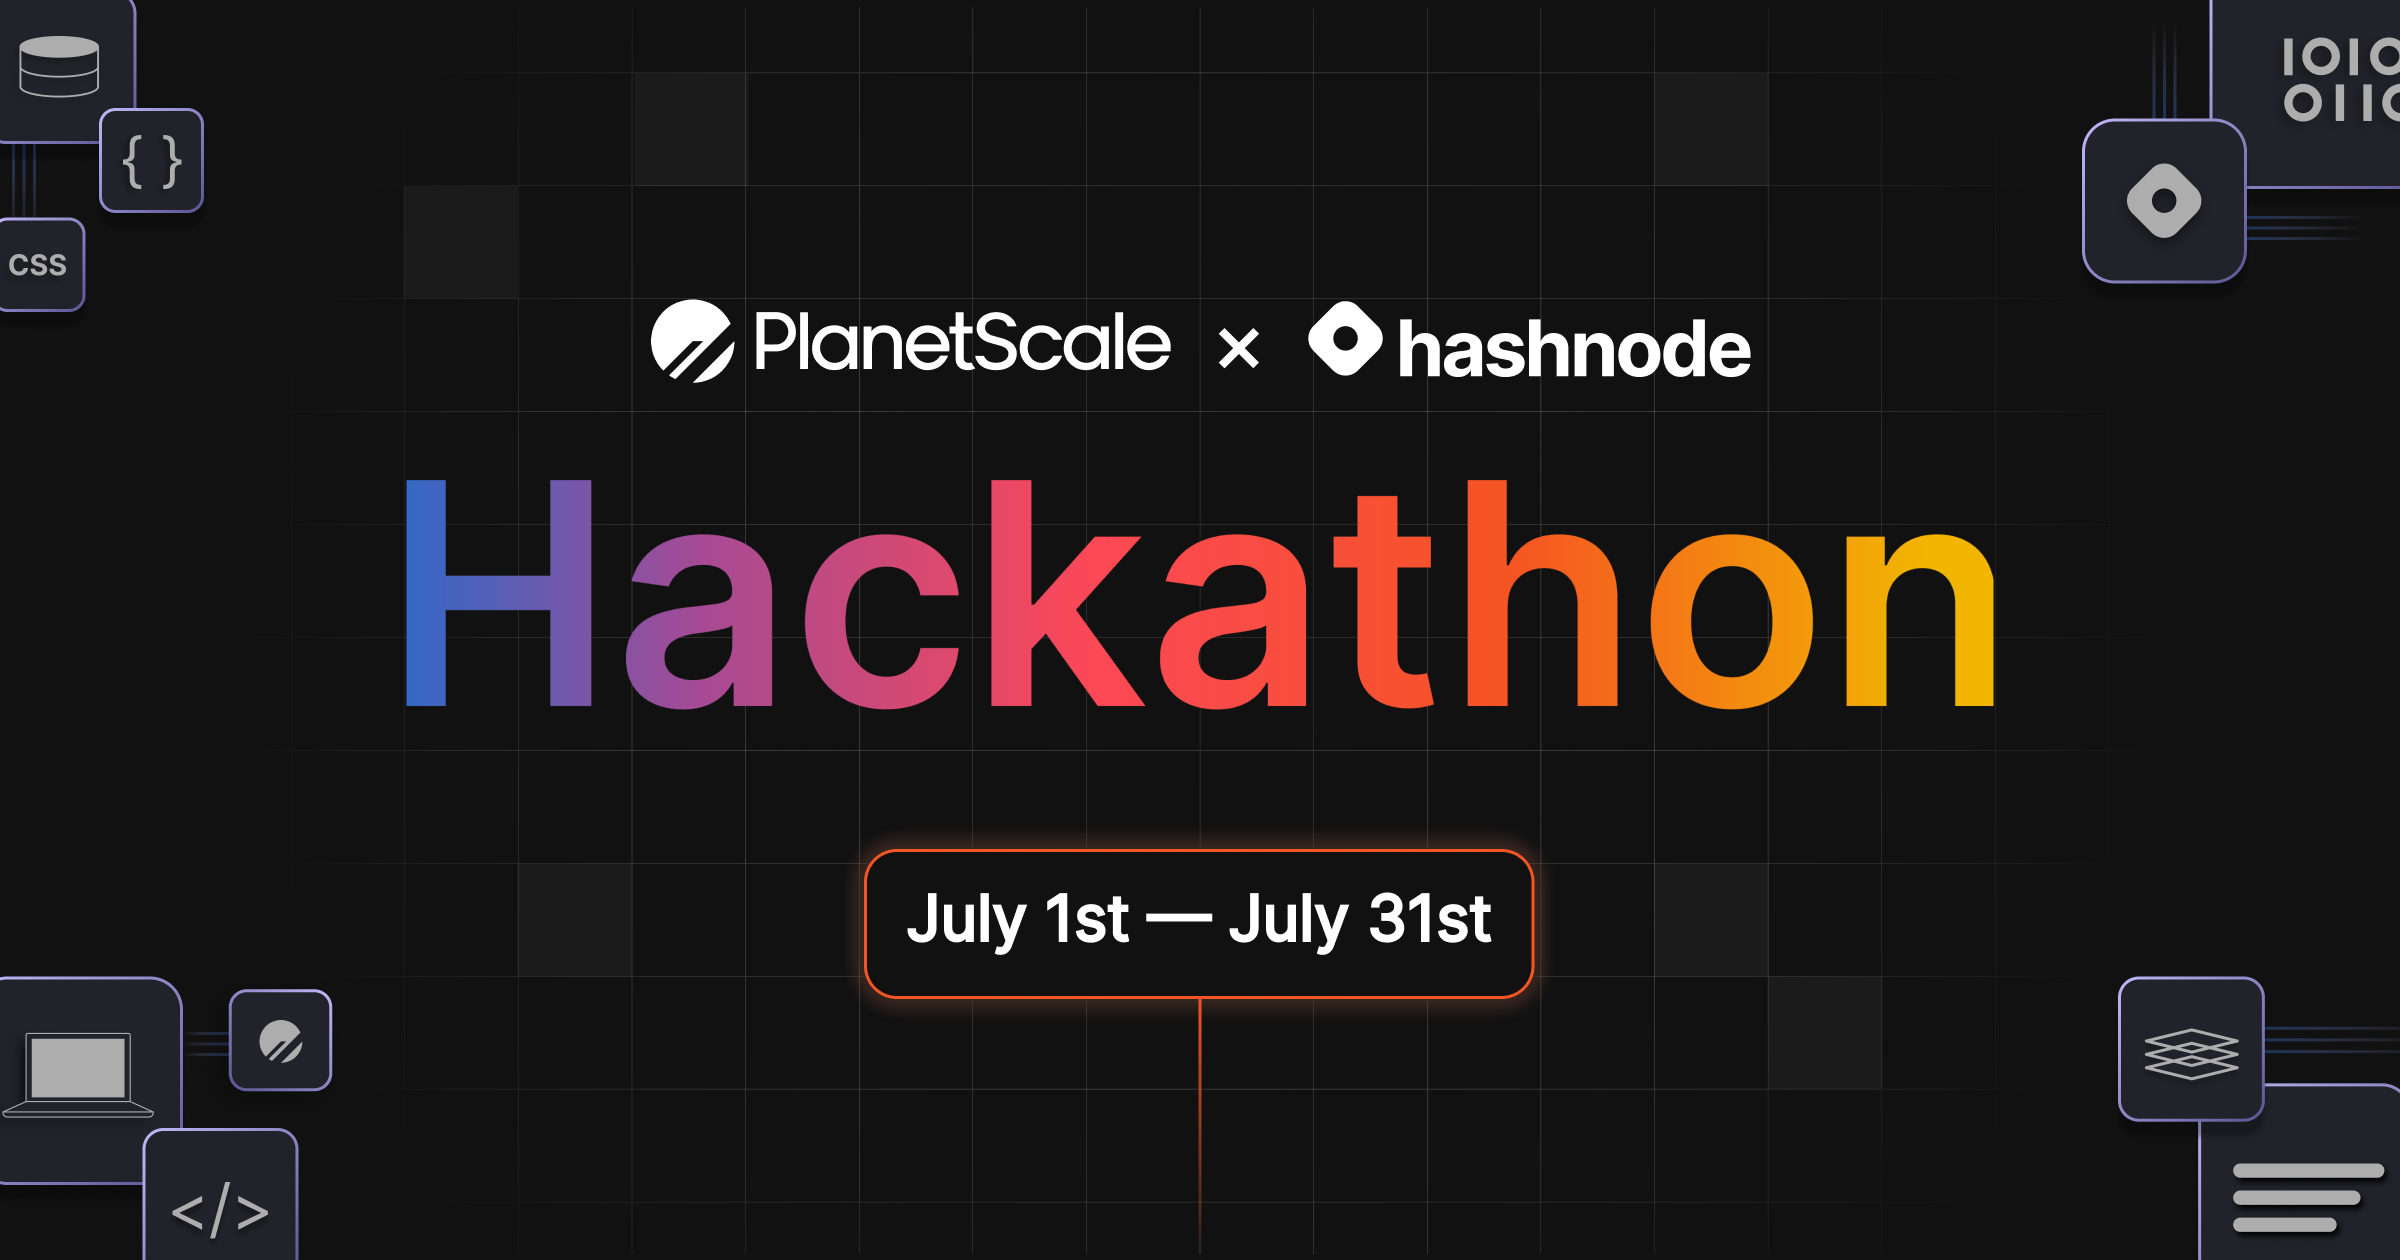 Announcing the PlanetScale and Hashnode July Hackathon